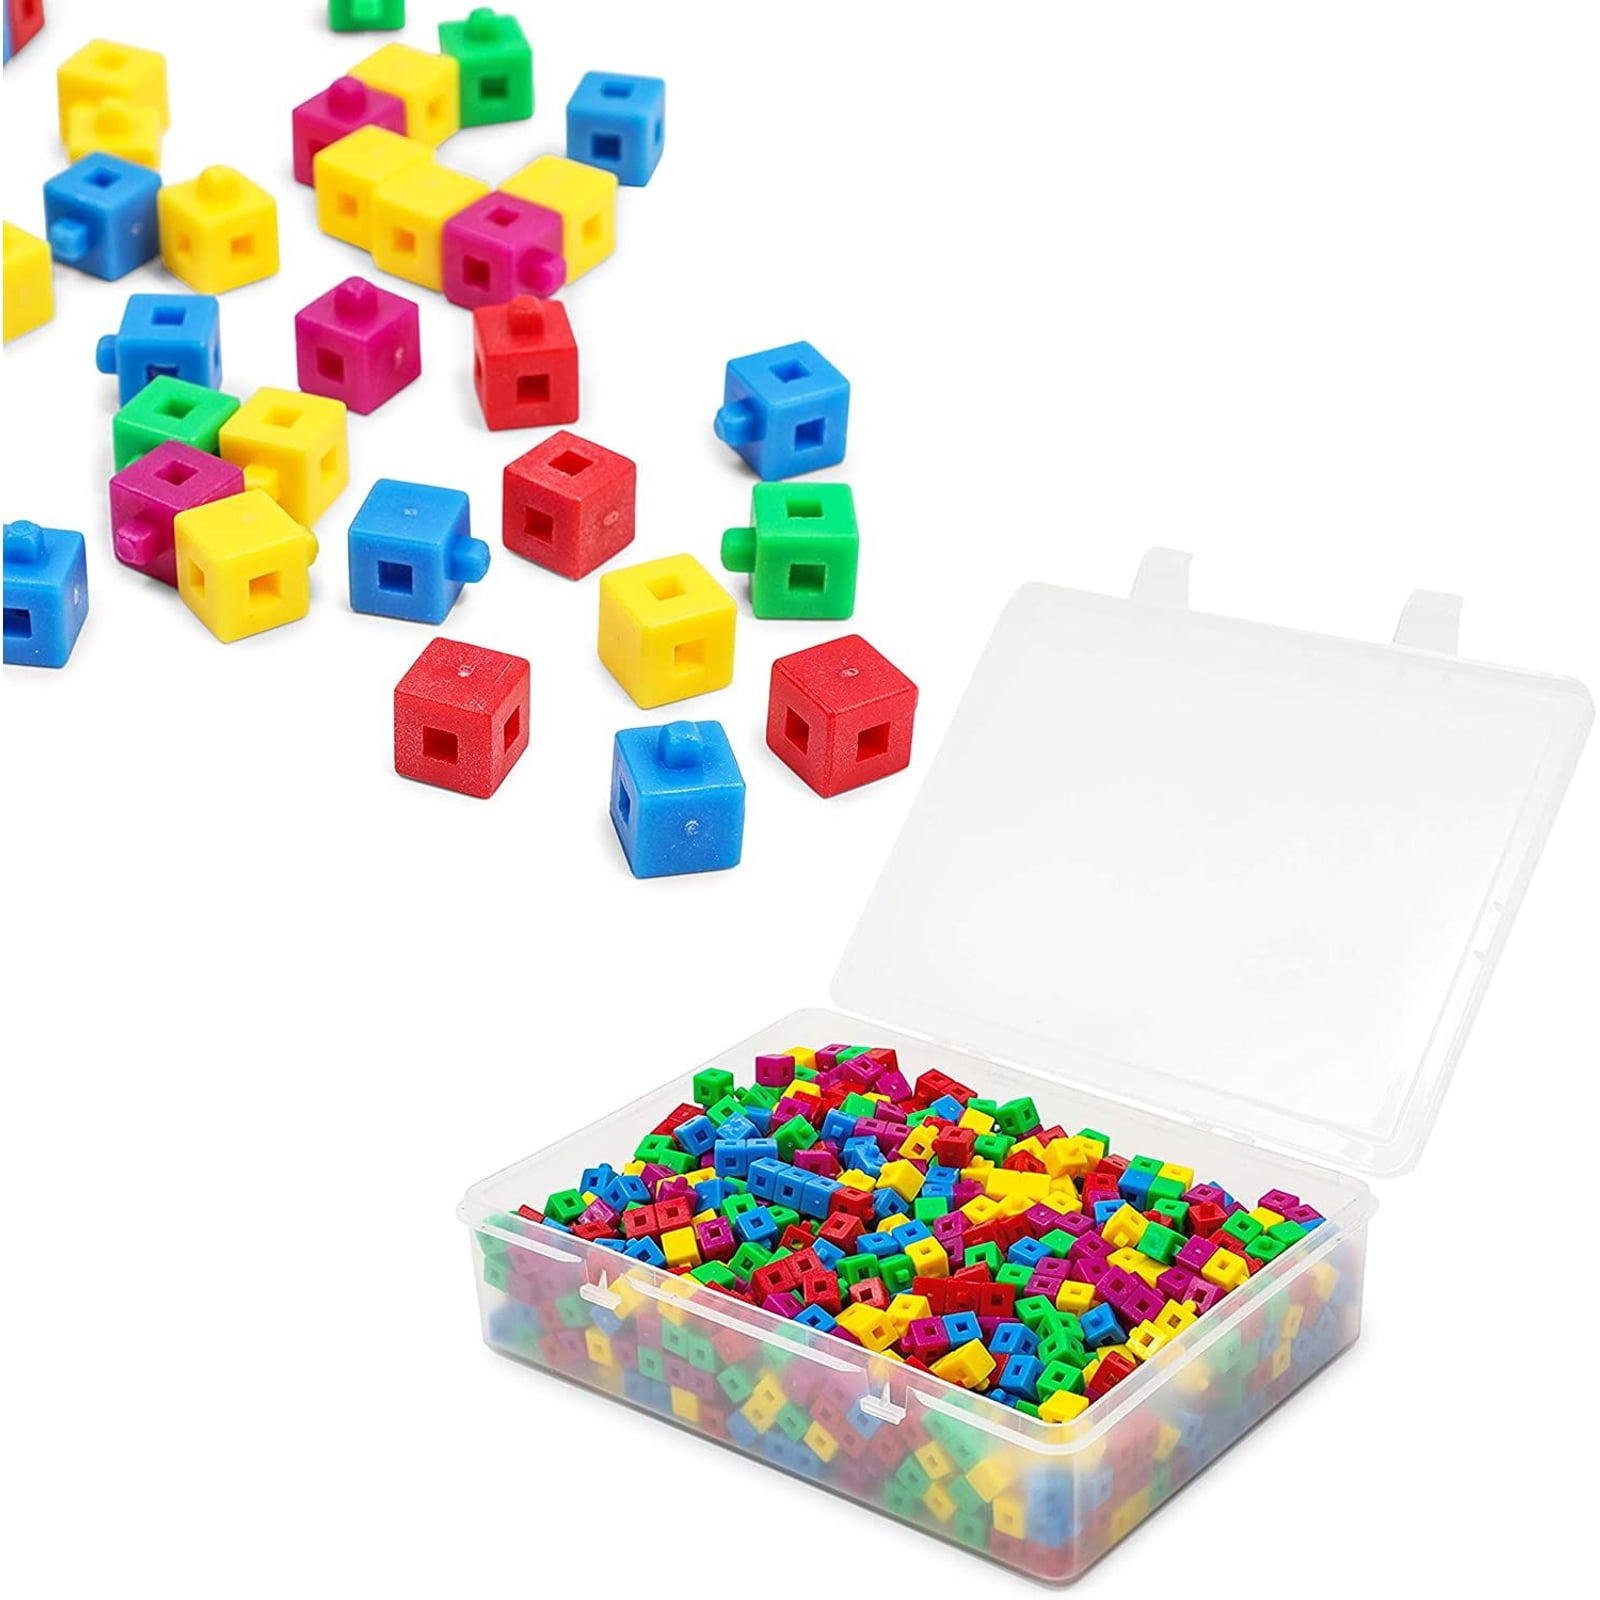 Plastic Counting Cubes 1cm  100 Pieces in 10 Colours  Patterns of Counters 